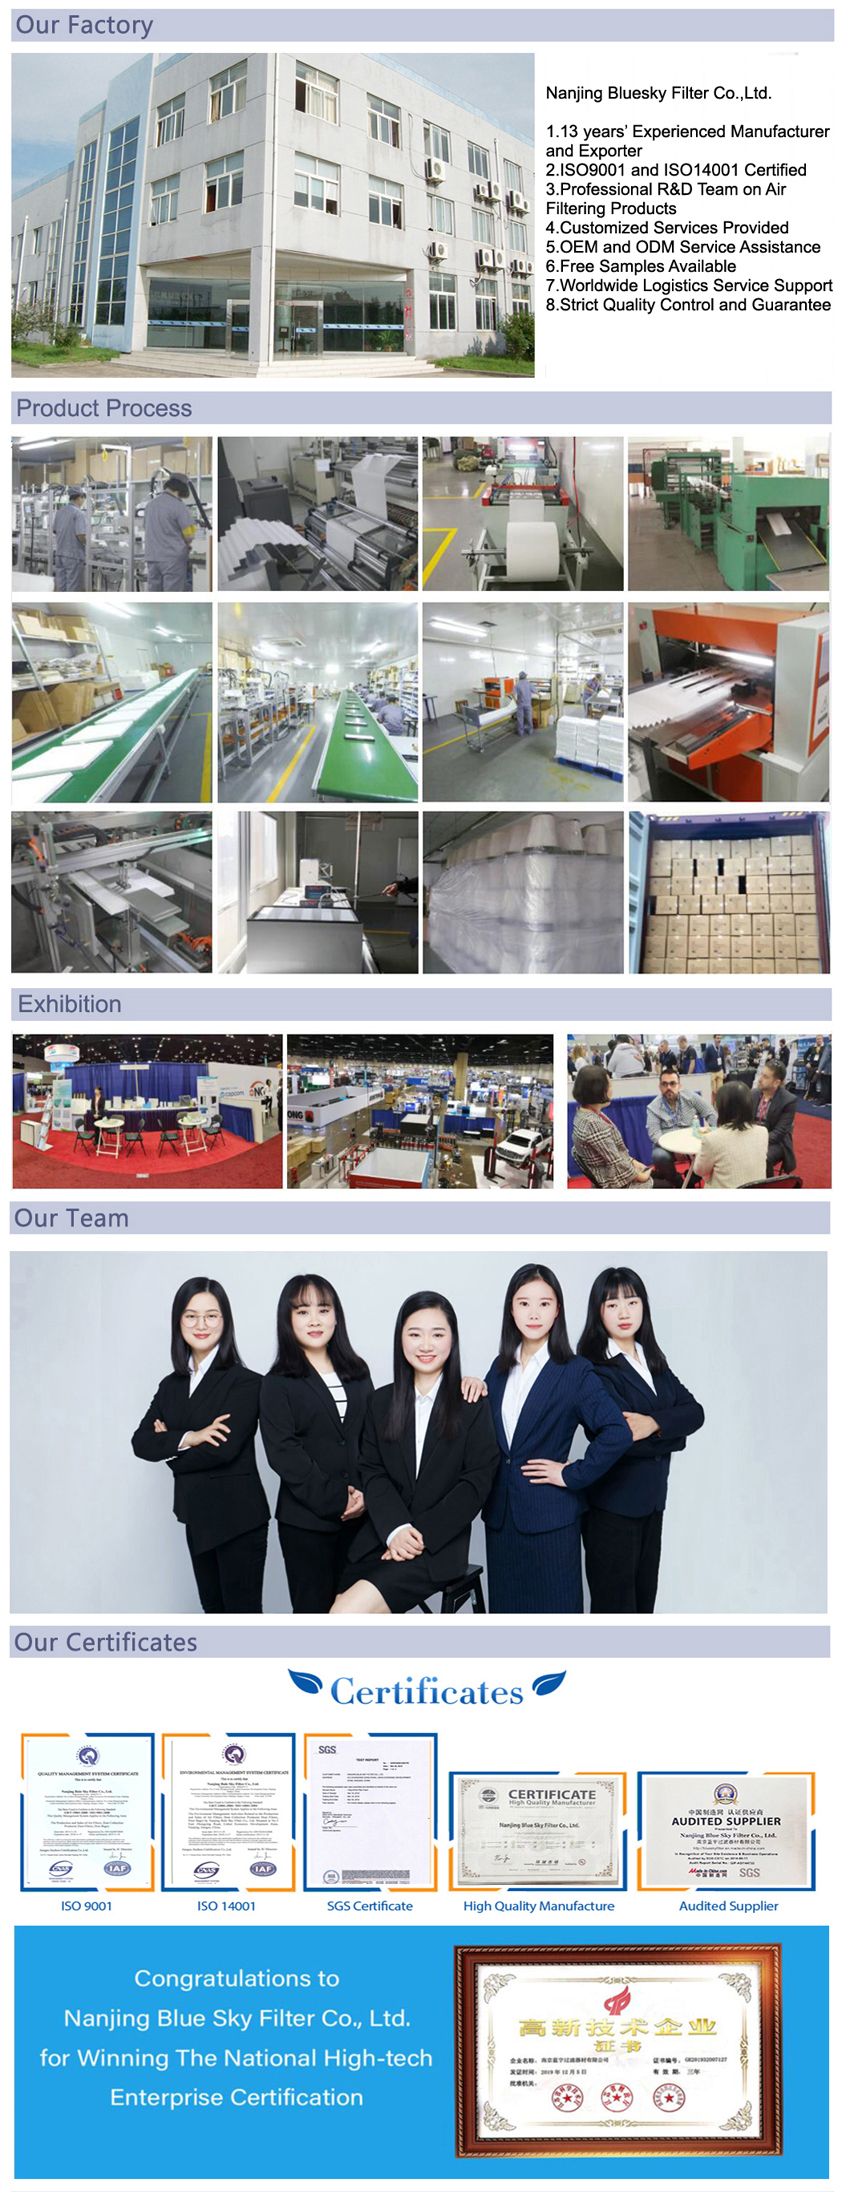 Our Company of Rowenta Vacuum Filters